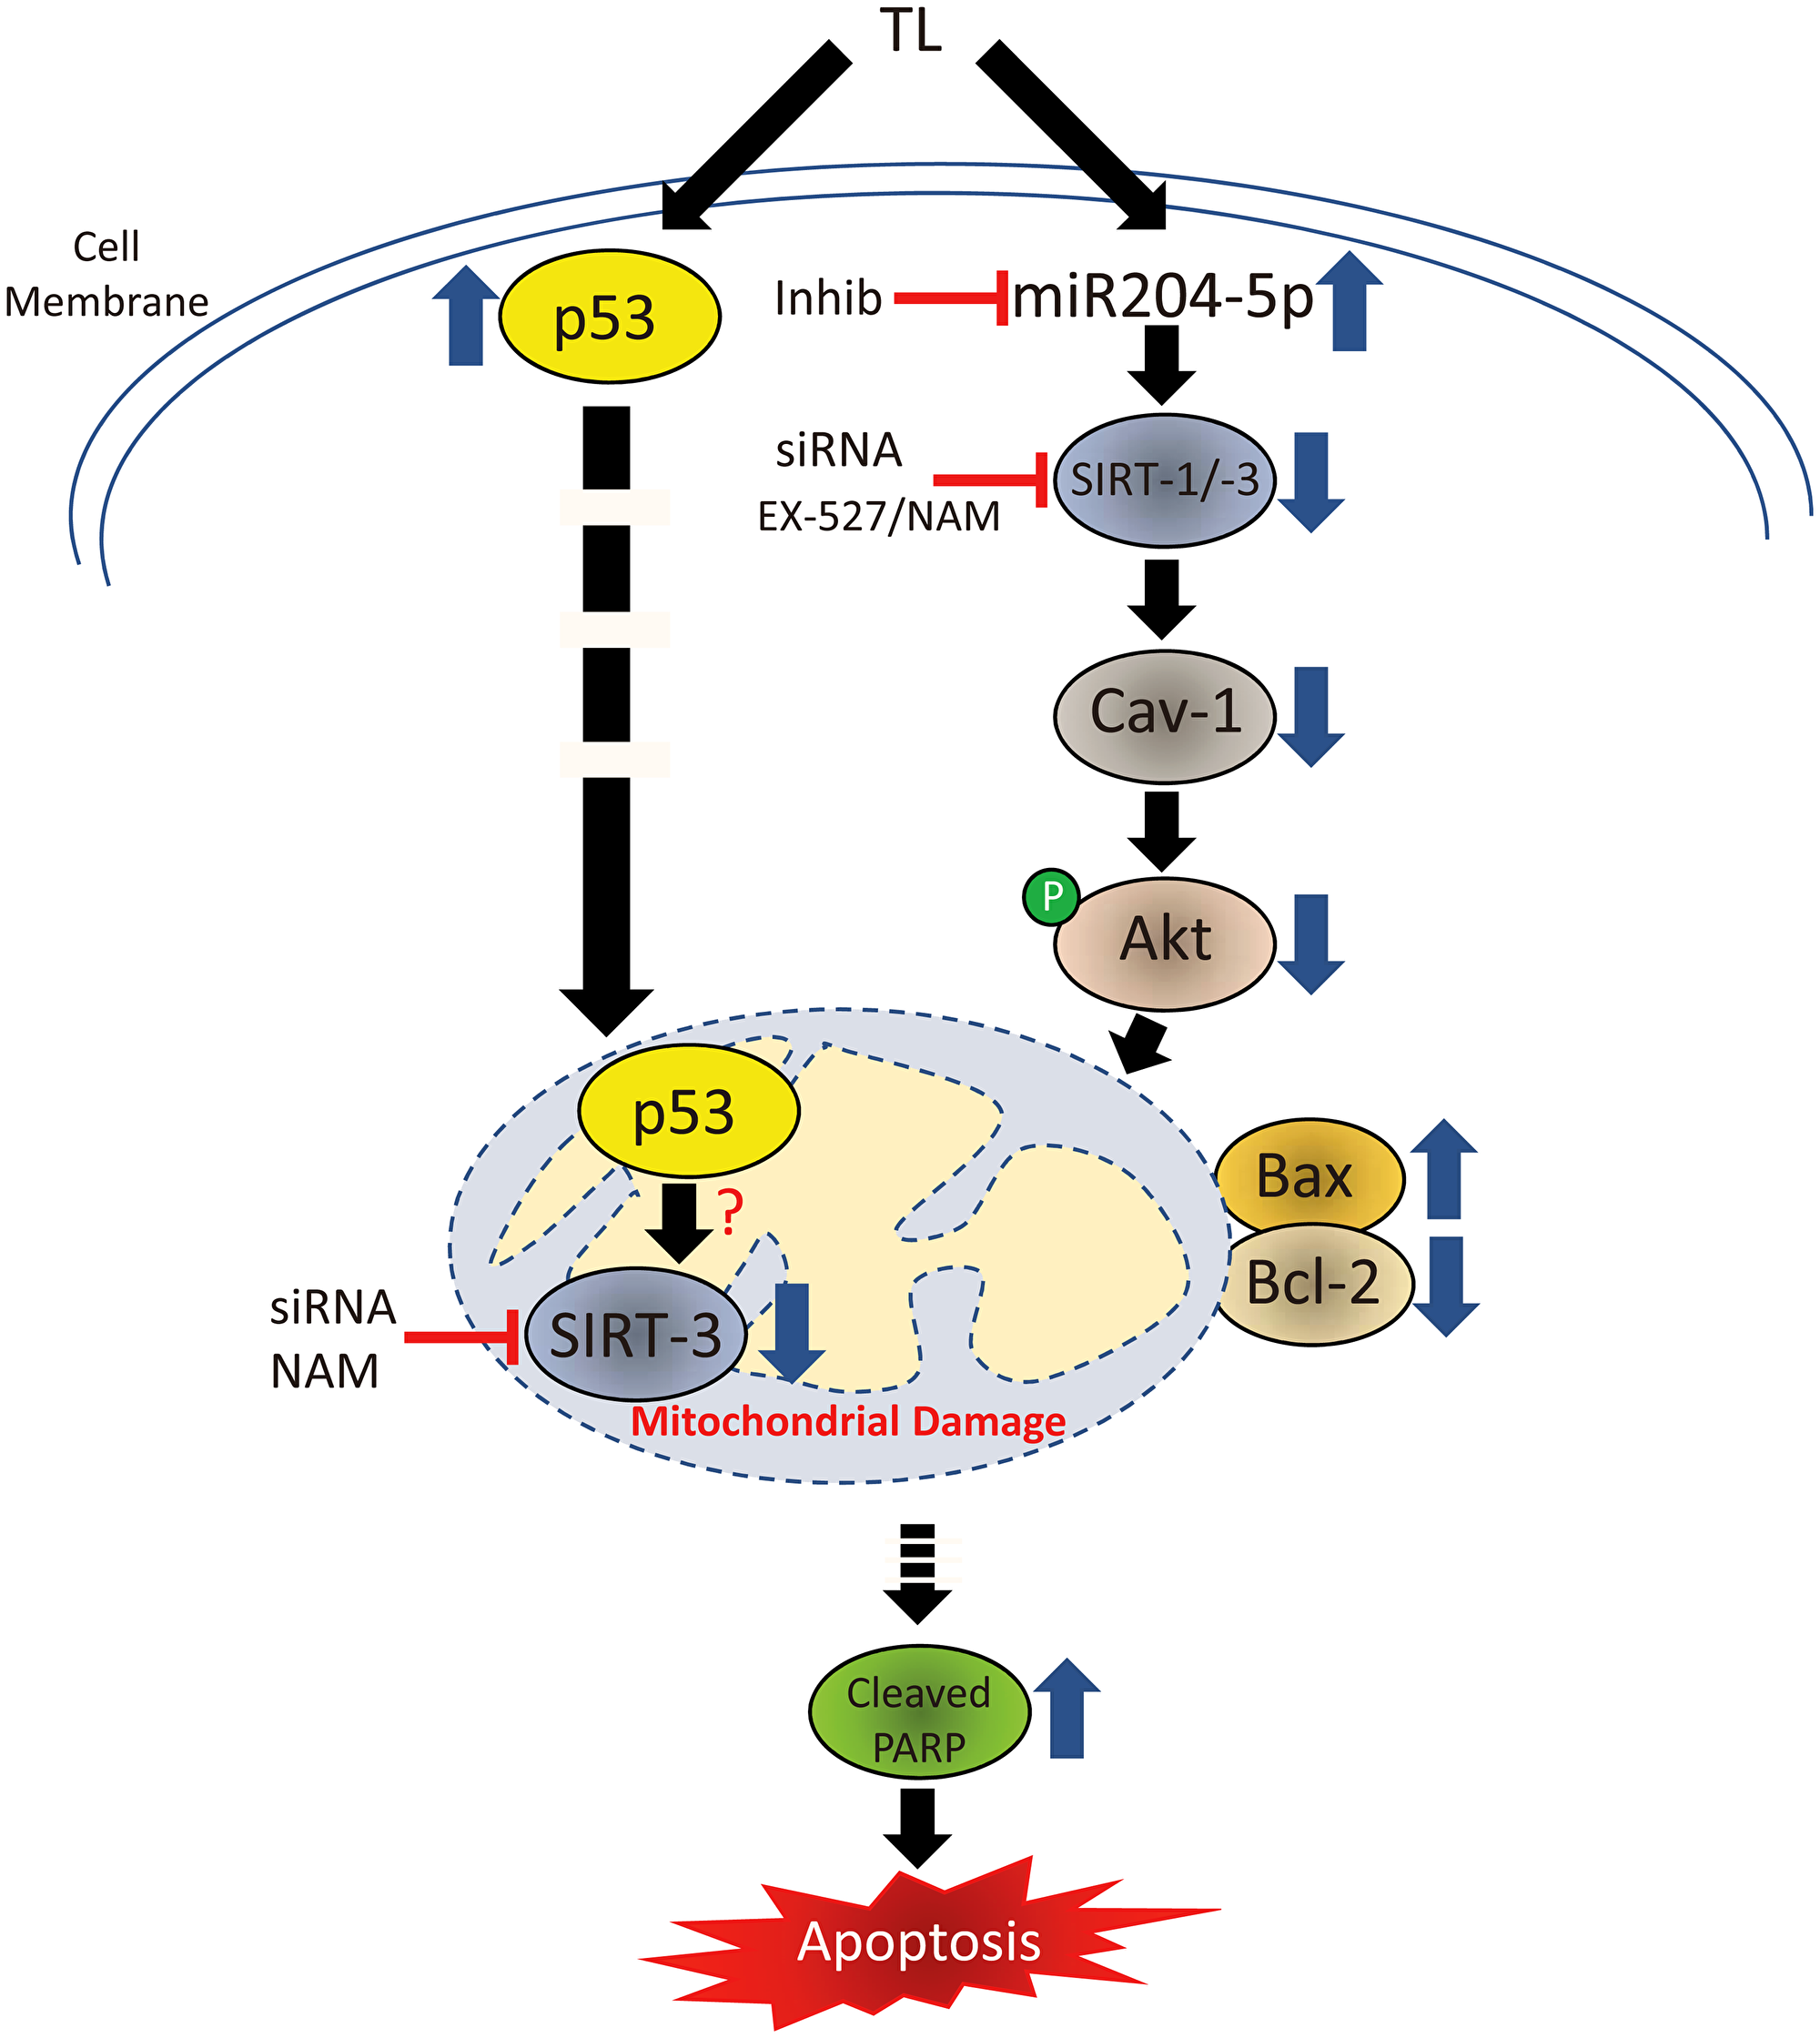 Figure 7: Signal transduction cascade mediating TL-induced apoptosis in NSCLC.